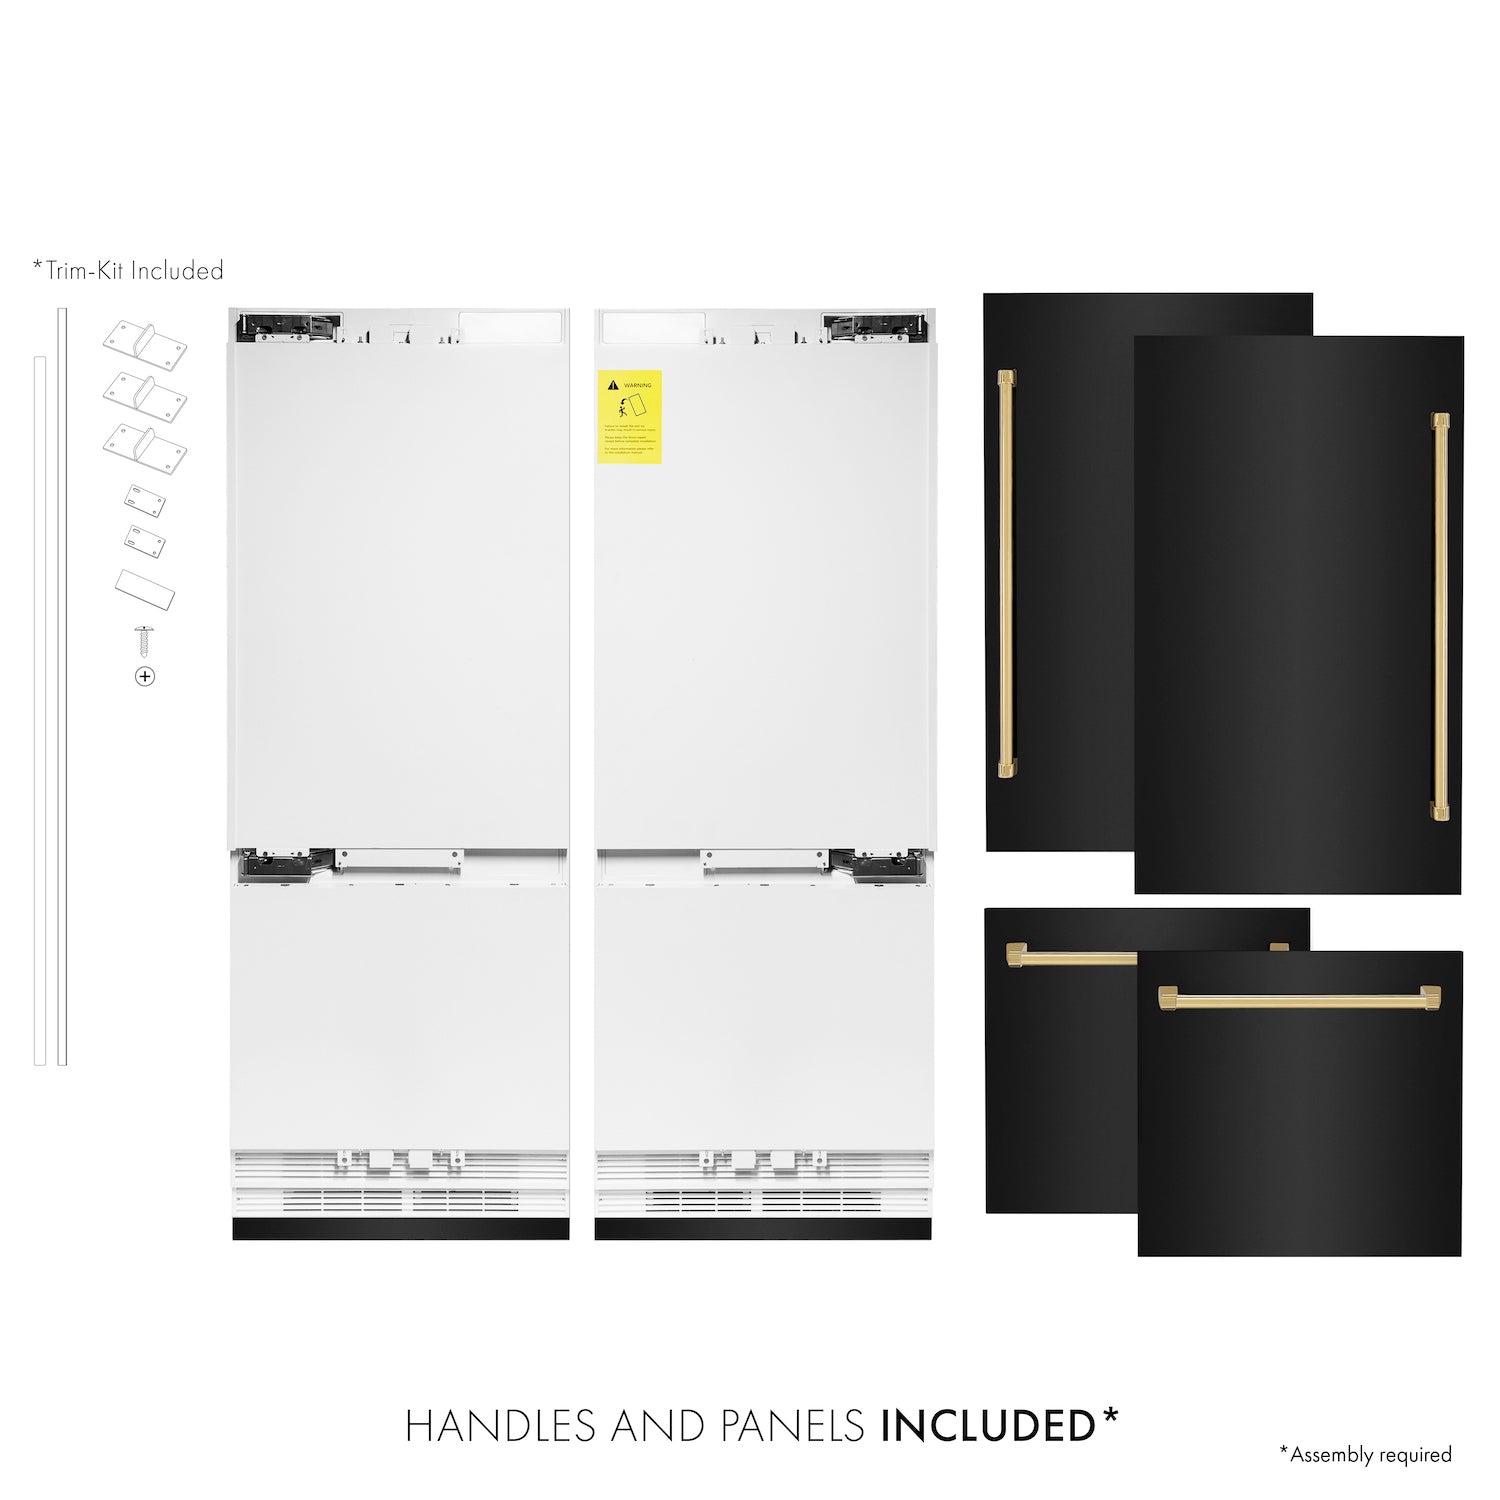 ZLINE Autograph Edition 60 in. 32.2 cu. ft. Built-in 4-Door French Door Refrigerator with Internal Water and Ice Dispenser in Black Stainless Steel with Polished Gold Accents (RBIVZ-BS-60-G) front, refrigeration unit, panels, and handles separated .